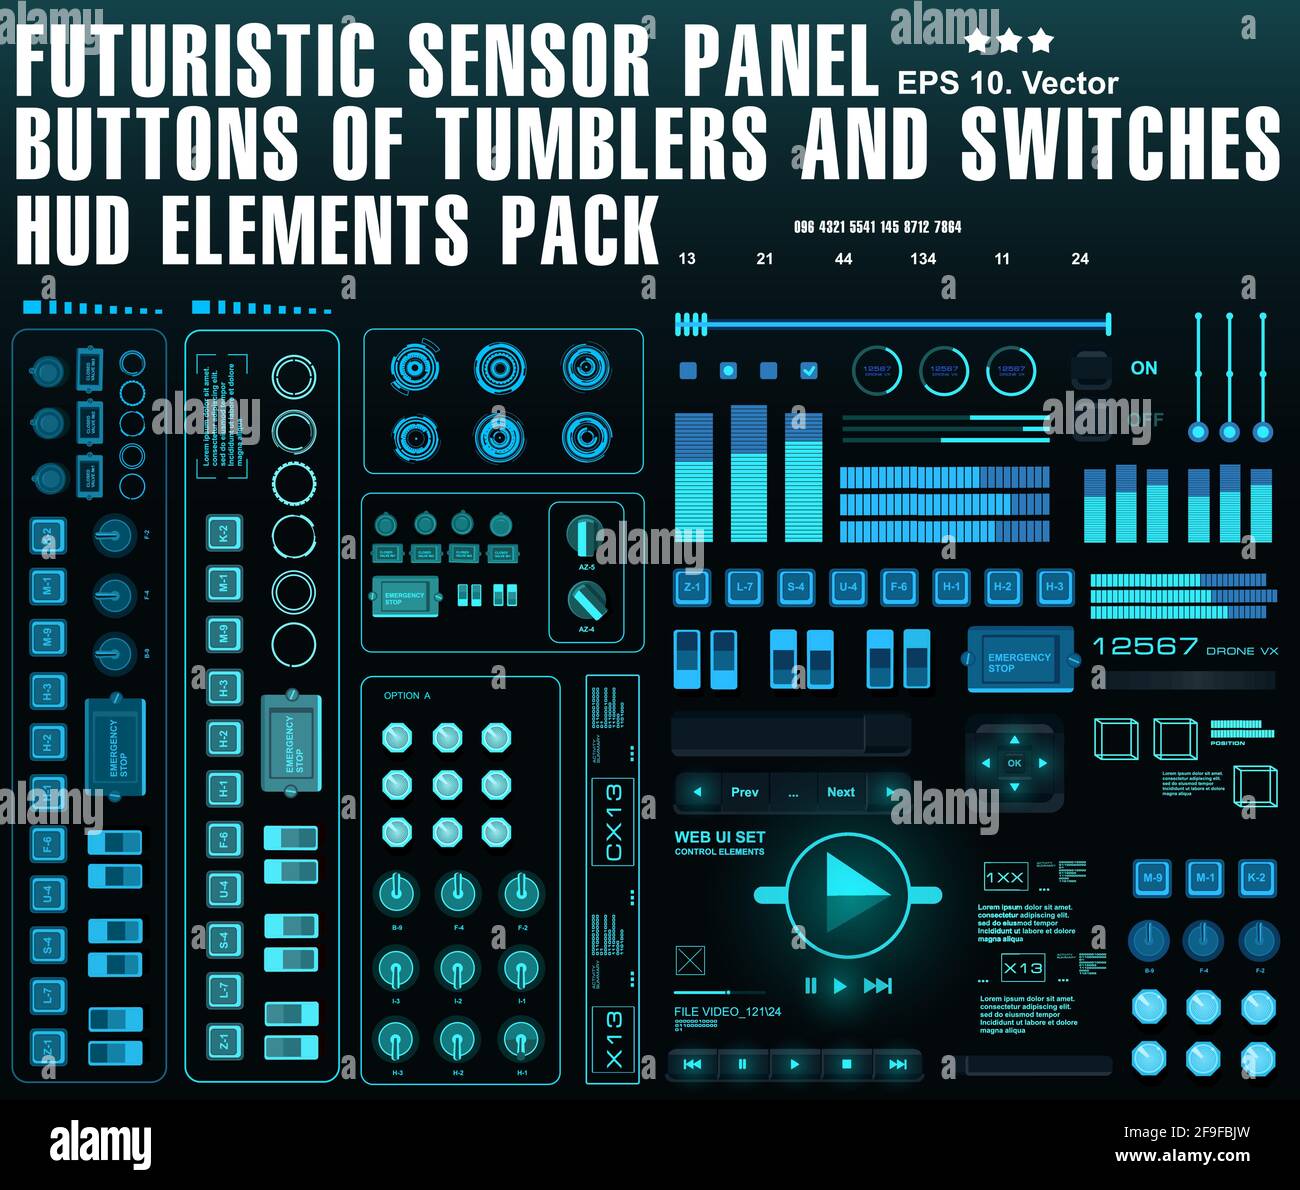 Futuristic sensor panel. Buttons of tumblers and switches. Stock Vector